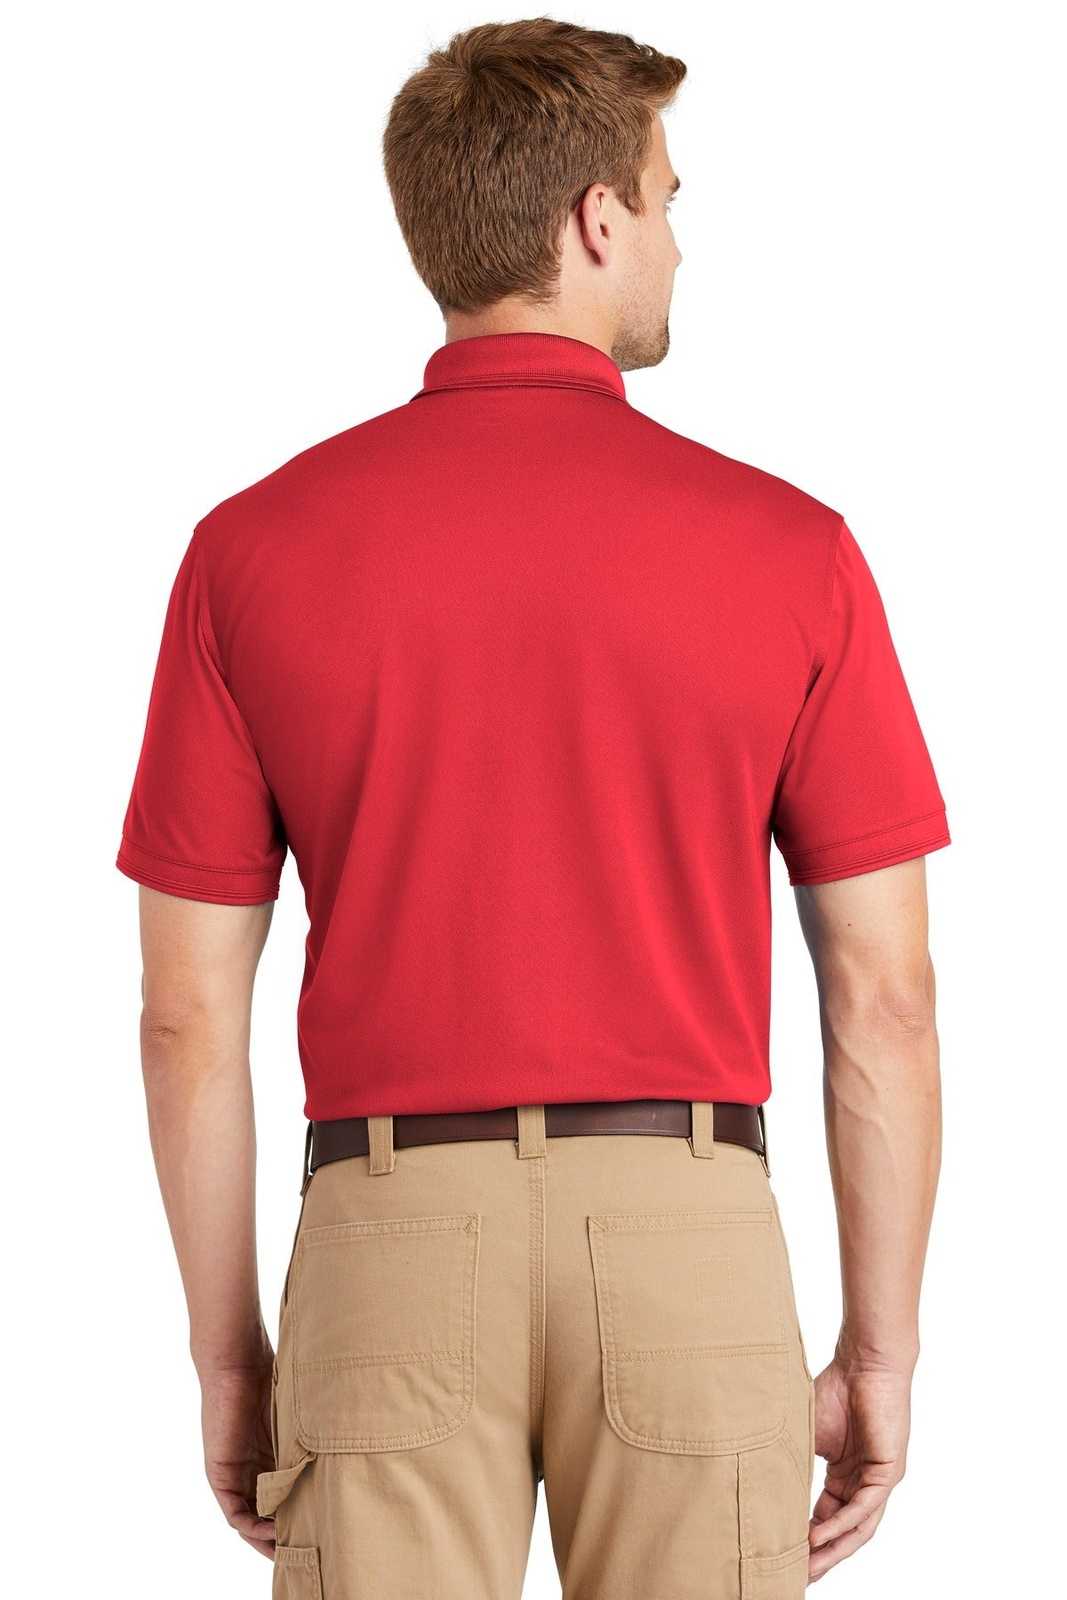 CornerStone CS4020 Industrial Snag-Proof Pique Polo - Red - HIT a Double - 2